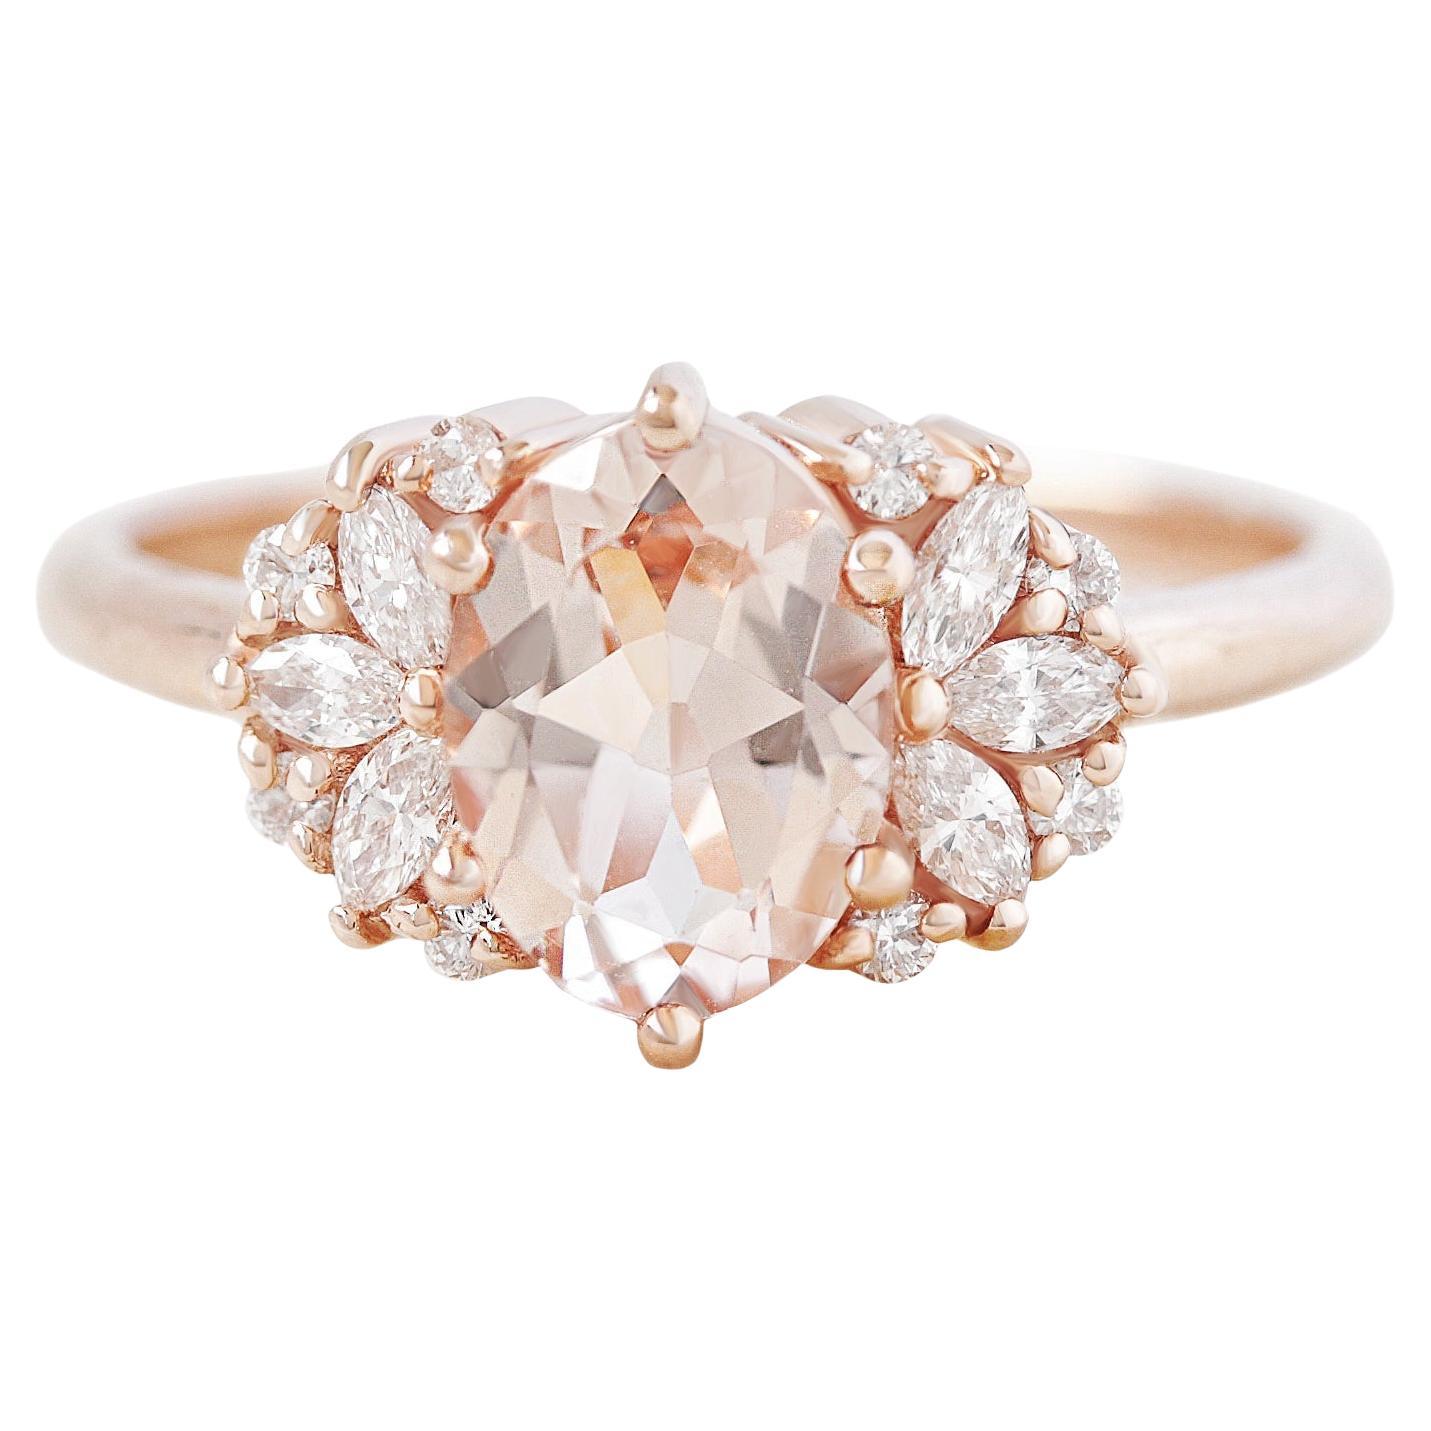 Oval Morganite and Marquise Diamonds Engagement Ring, 14k Rose Gold, 'Rosalia' For Sale